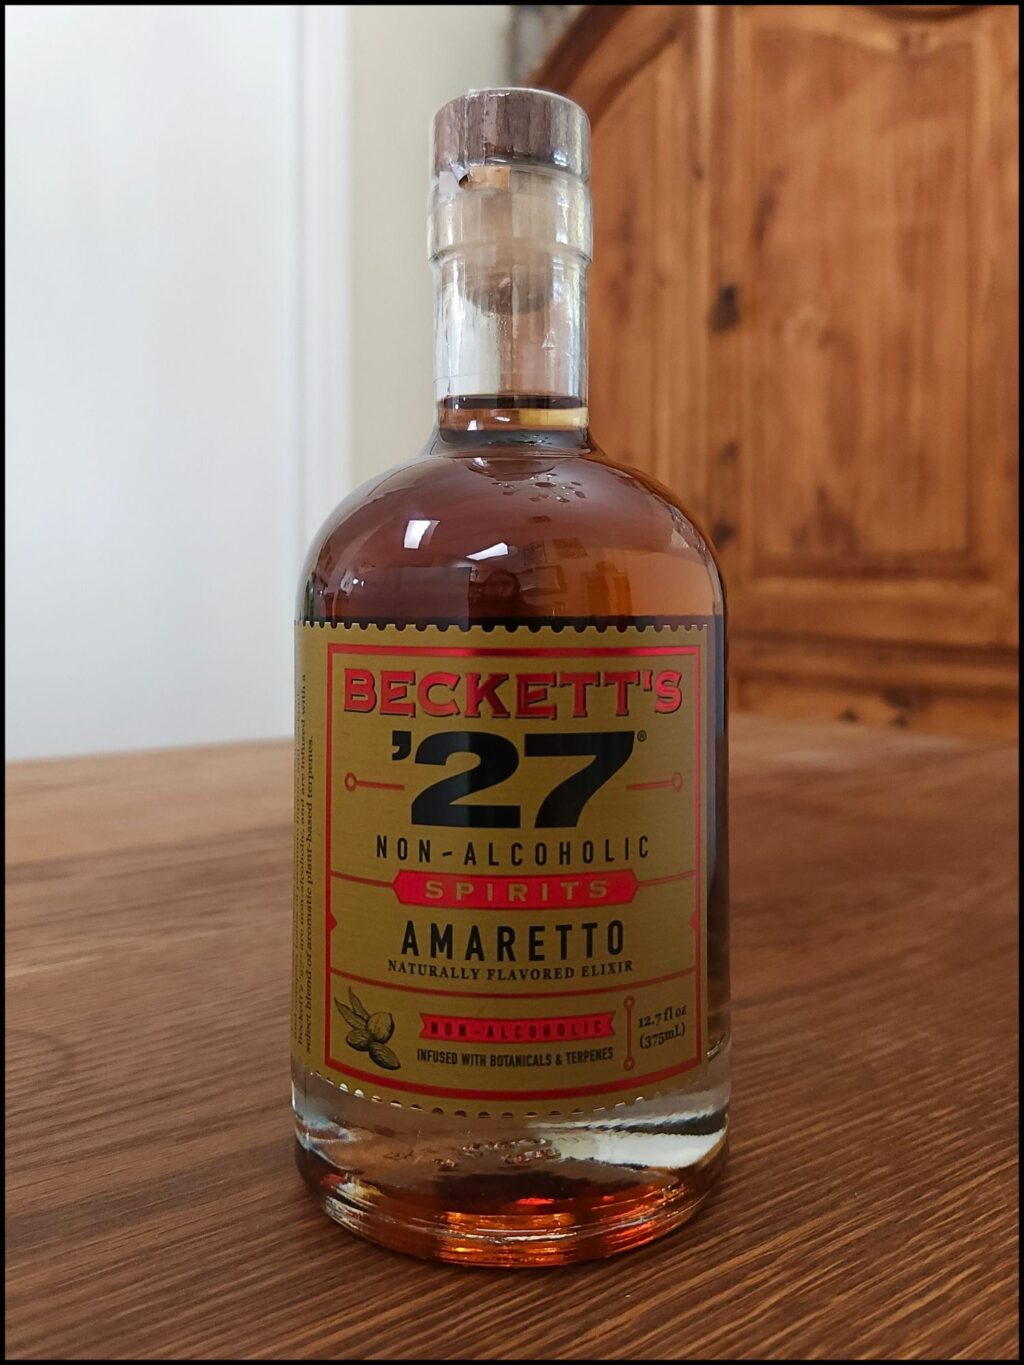 Bottle of Beckett's '27 Non-Alcoholic Amaretto sitting on a wooden table, in front of a mixed white and wooden background